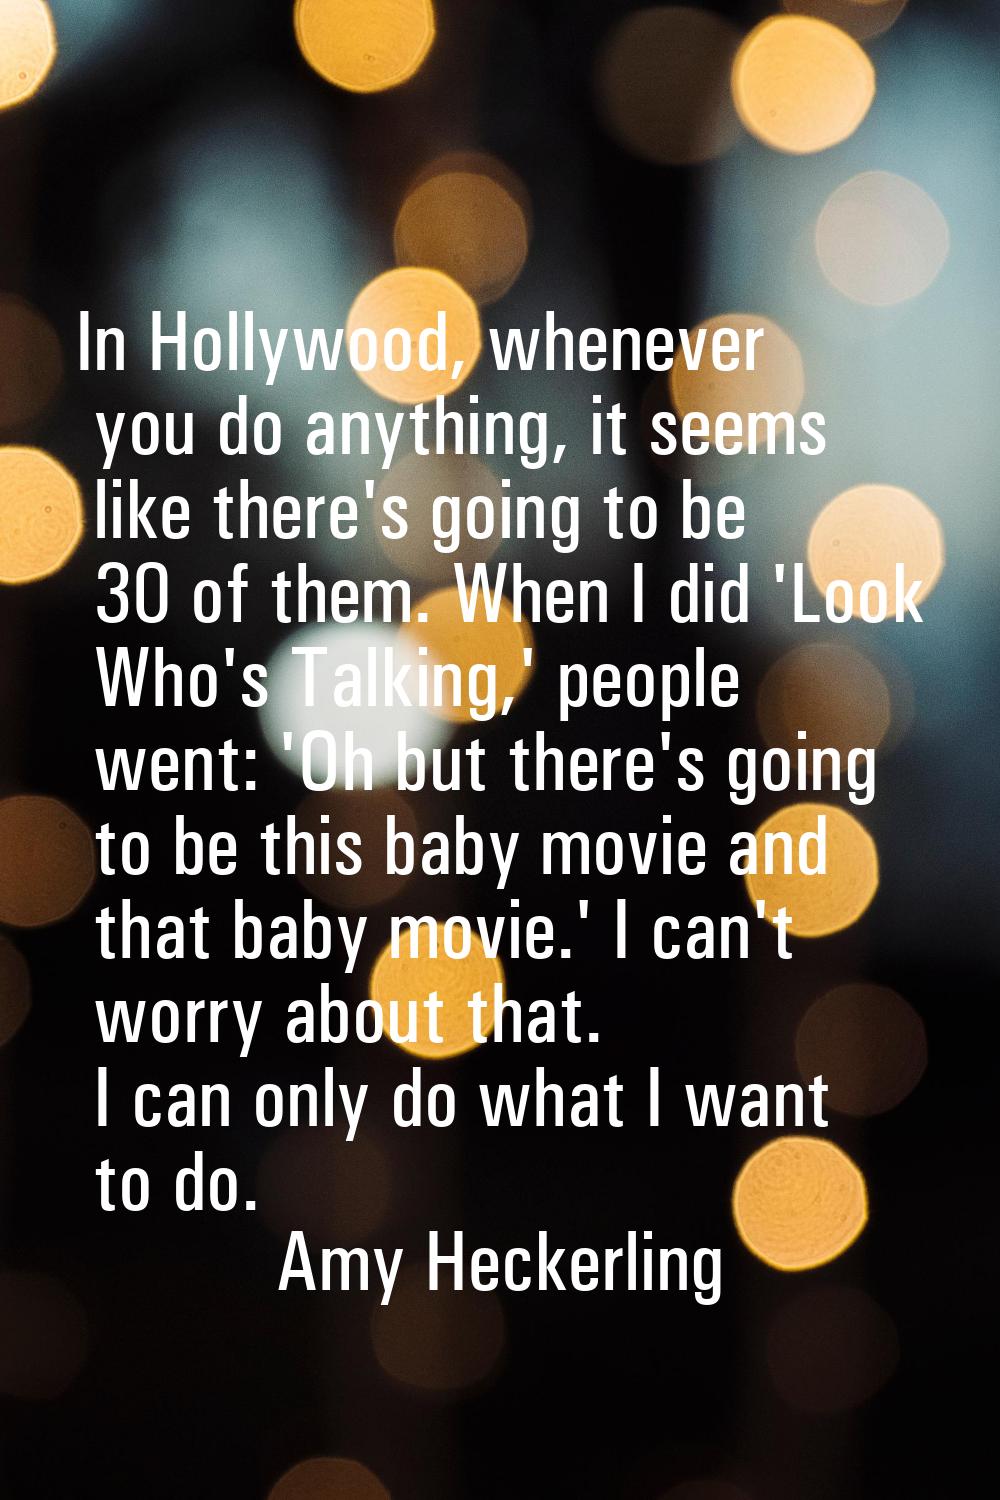 In Hollywood, whenever you do anything, it seems like there's going to be 30 of them. When I did 'L